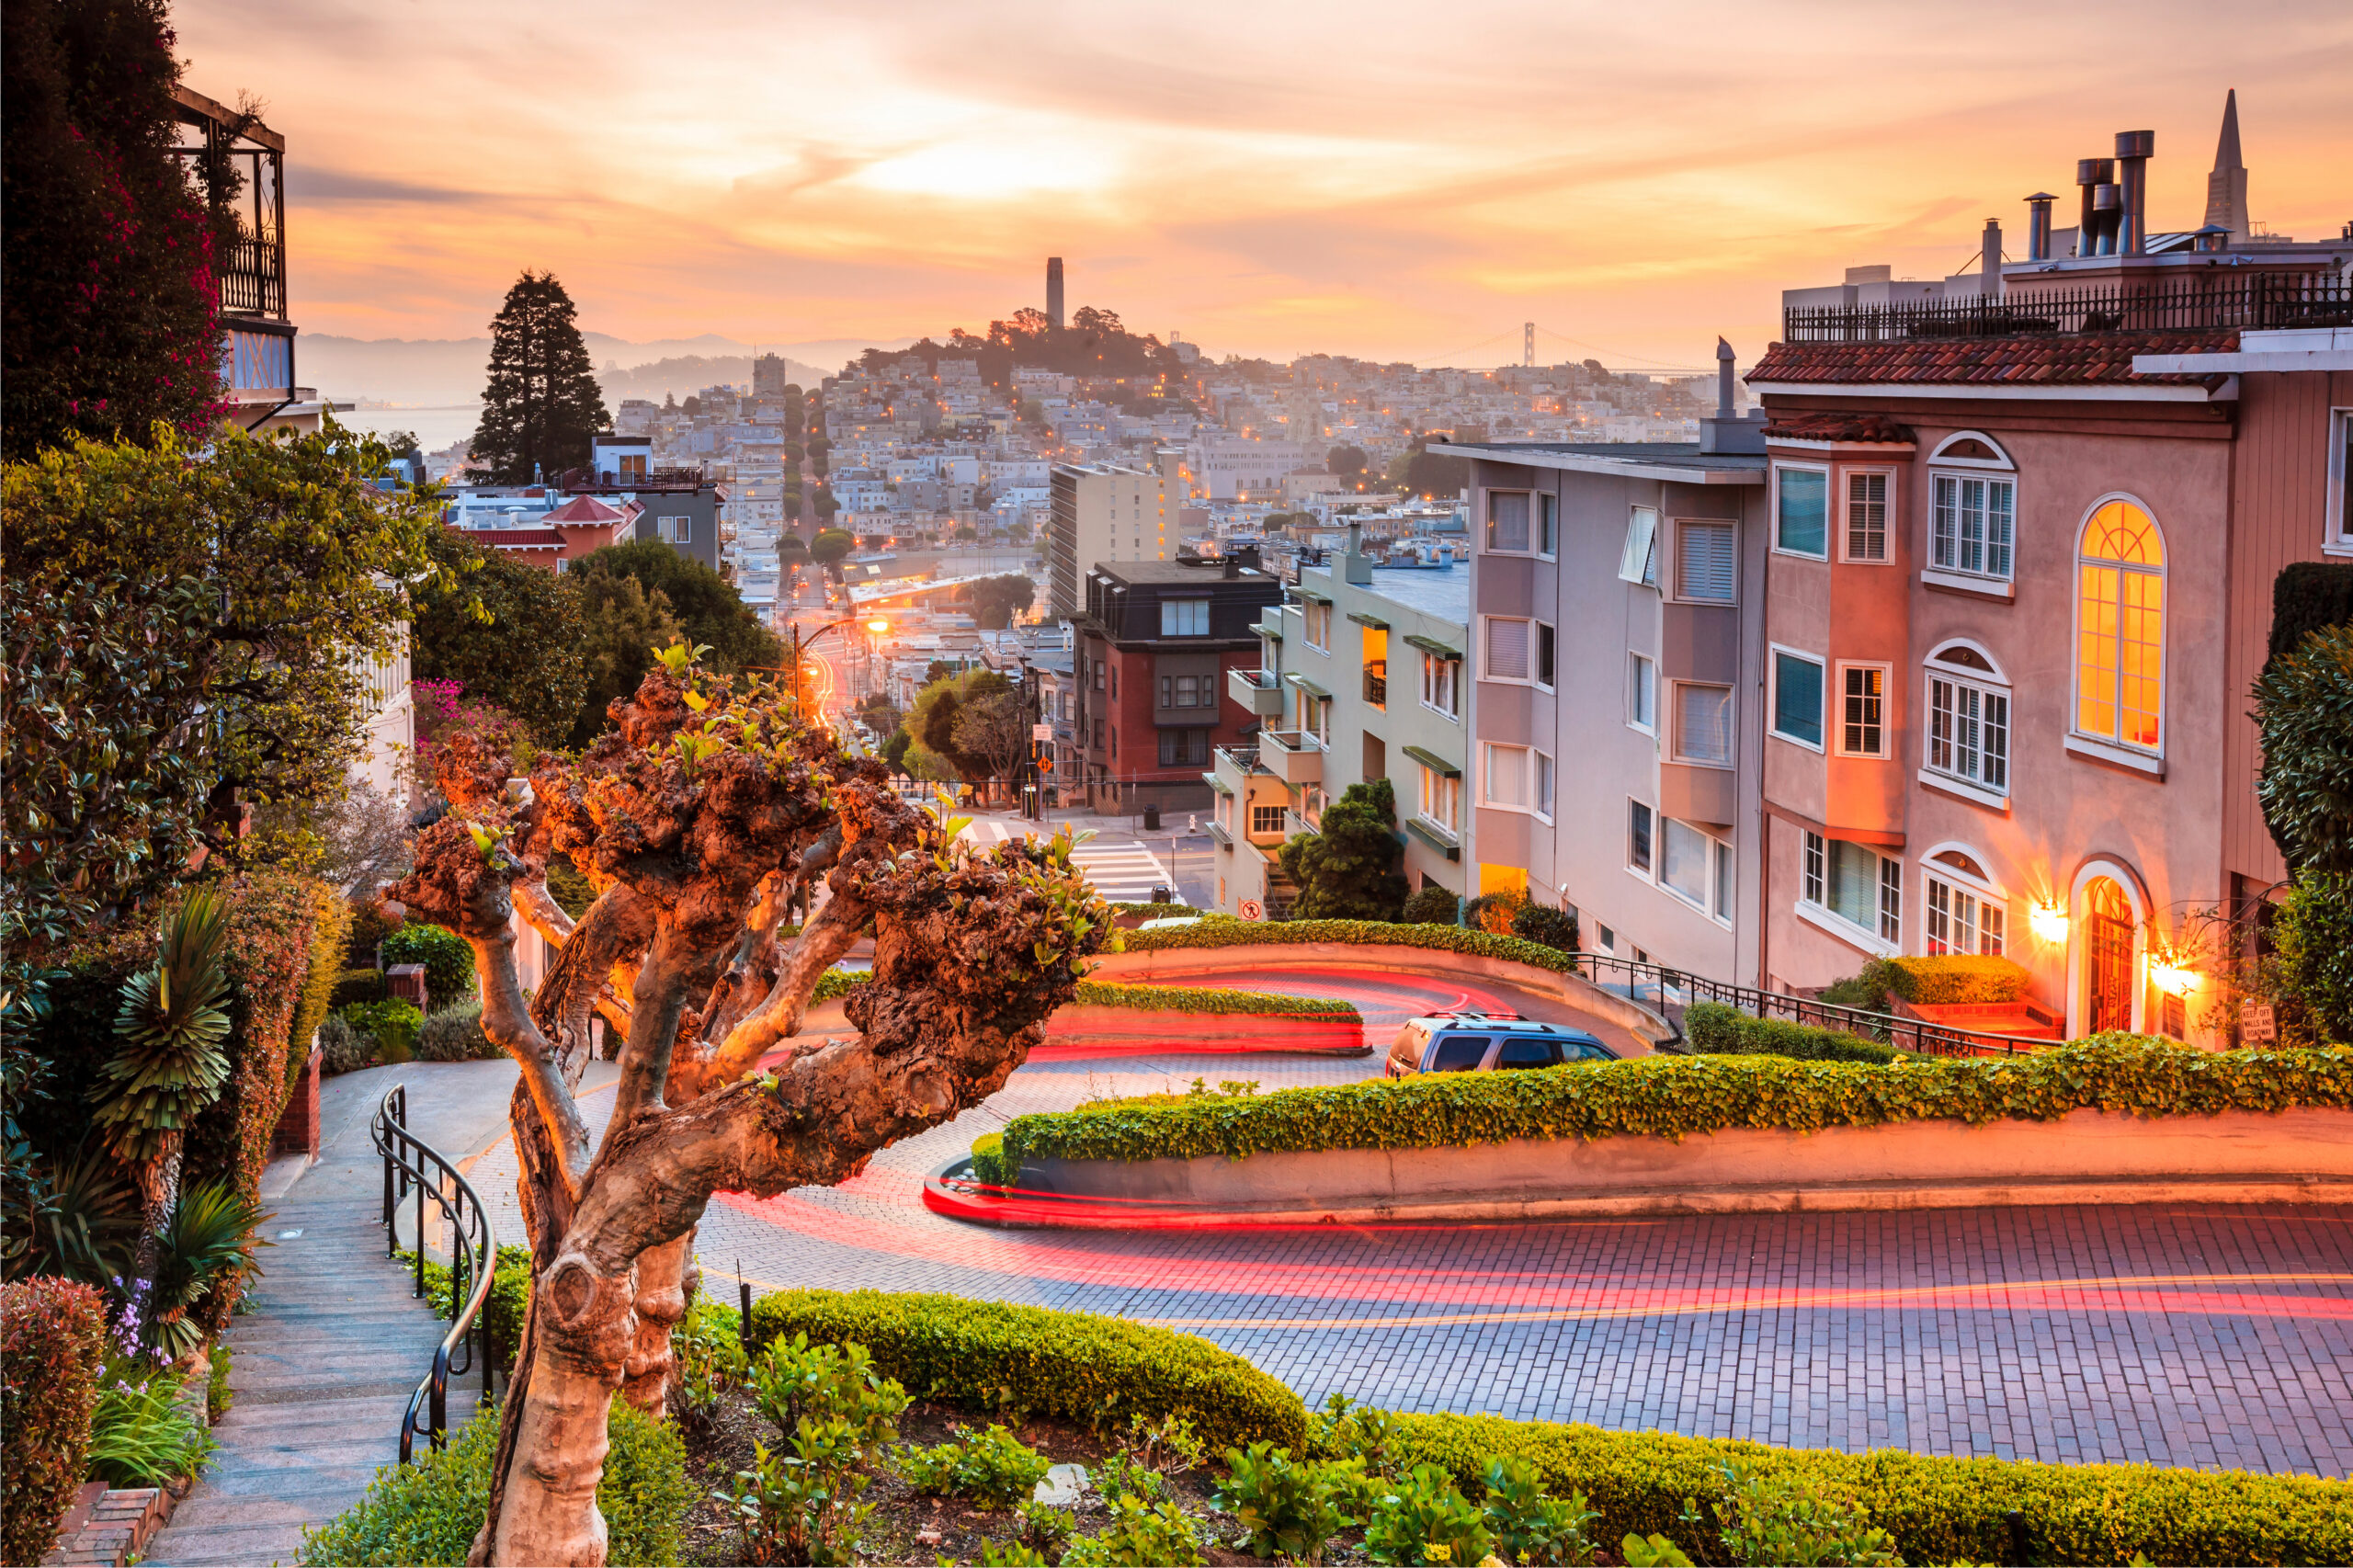 One of the best attractions in San Francisco, Lombard Street